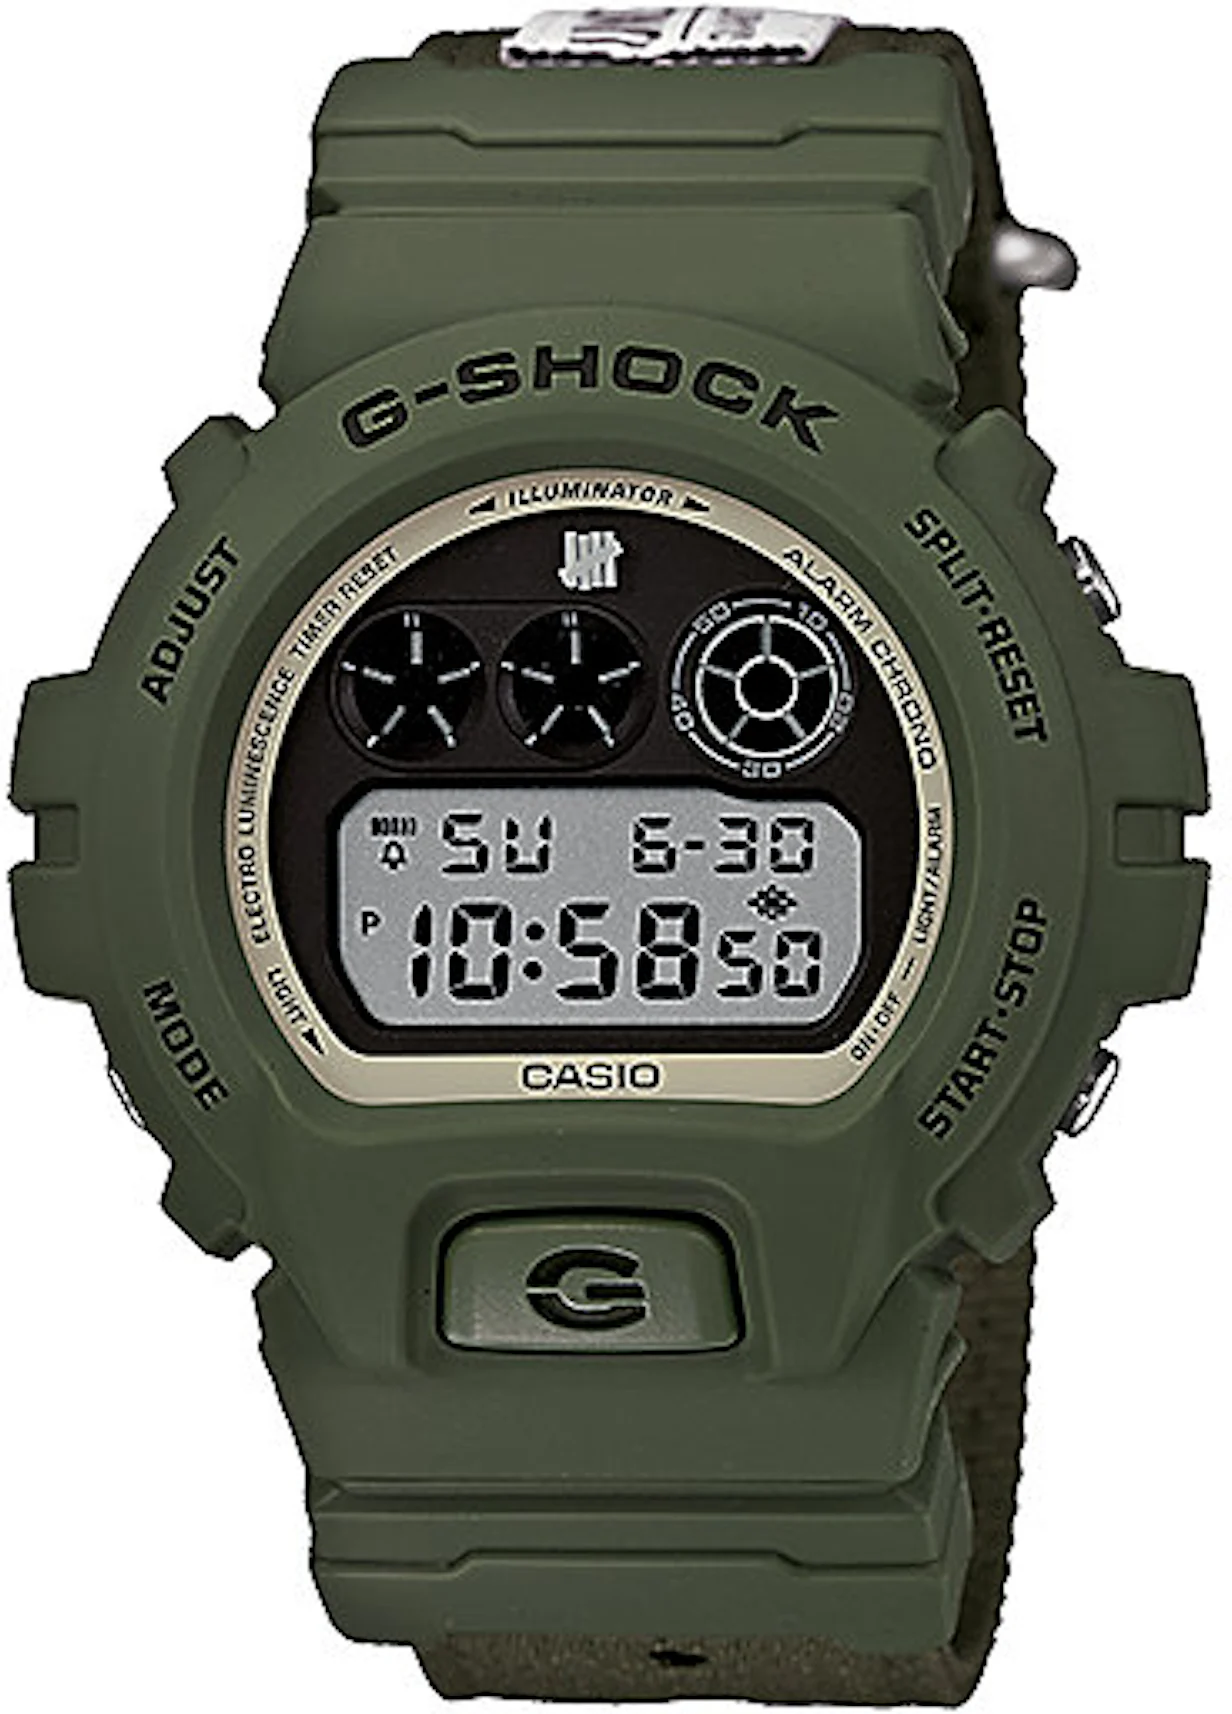 Casio G-Shock x BAPE Limited Edition GA-110 54mm in Resin - US